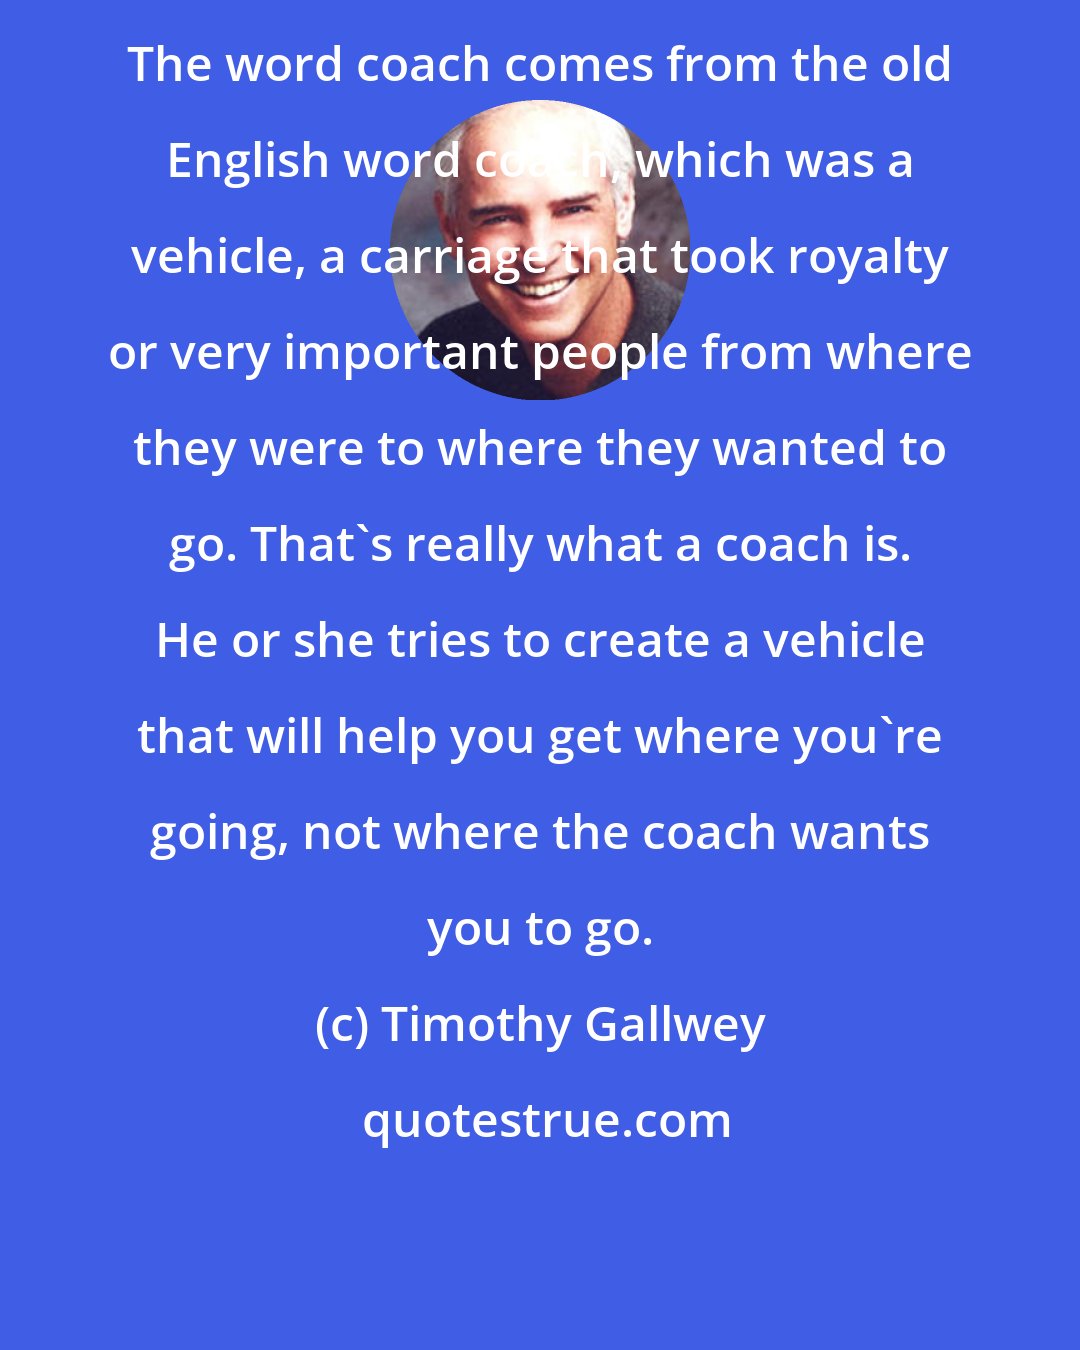 Timothy Gallwey: The word coach comes from the old English word coach, which was a vehicle, a carriage that took royalty or very important people from where they were to where they wanted to go. That's really what a coach is. He or she tries to create a vehicle that will help you get where you're going, not where the coach wants you to go.